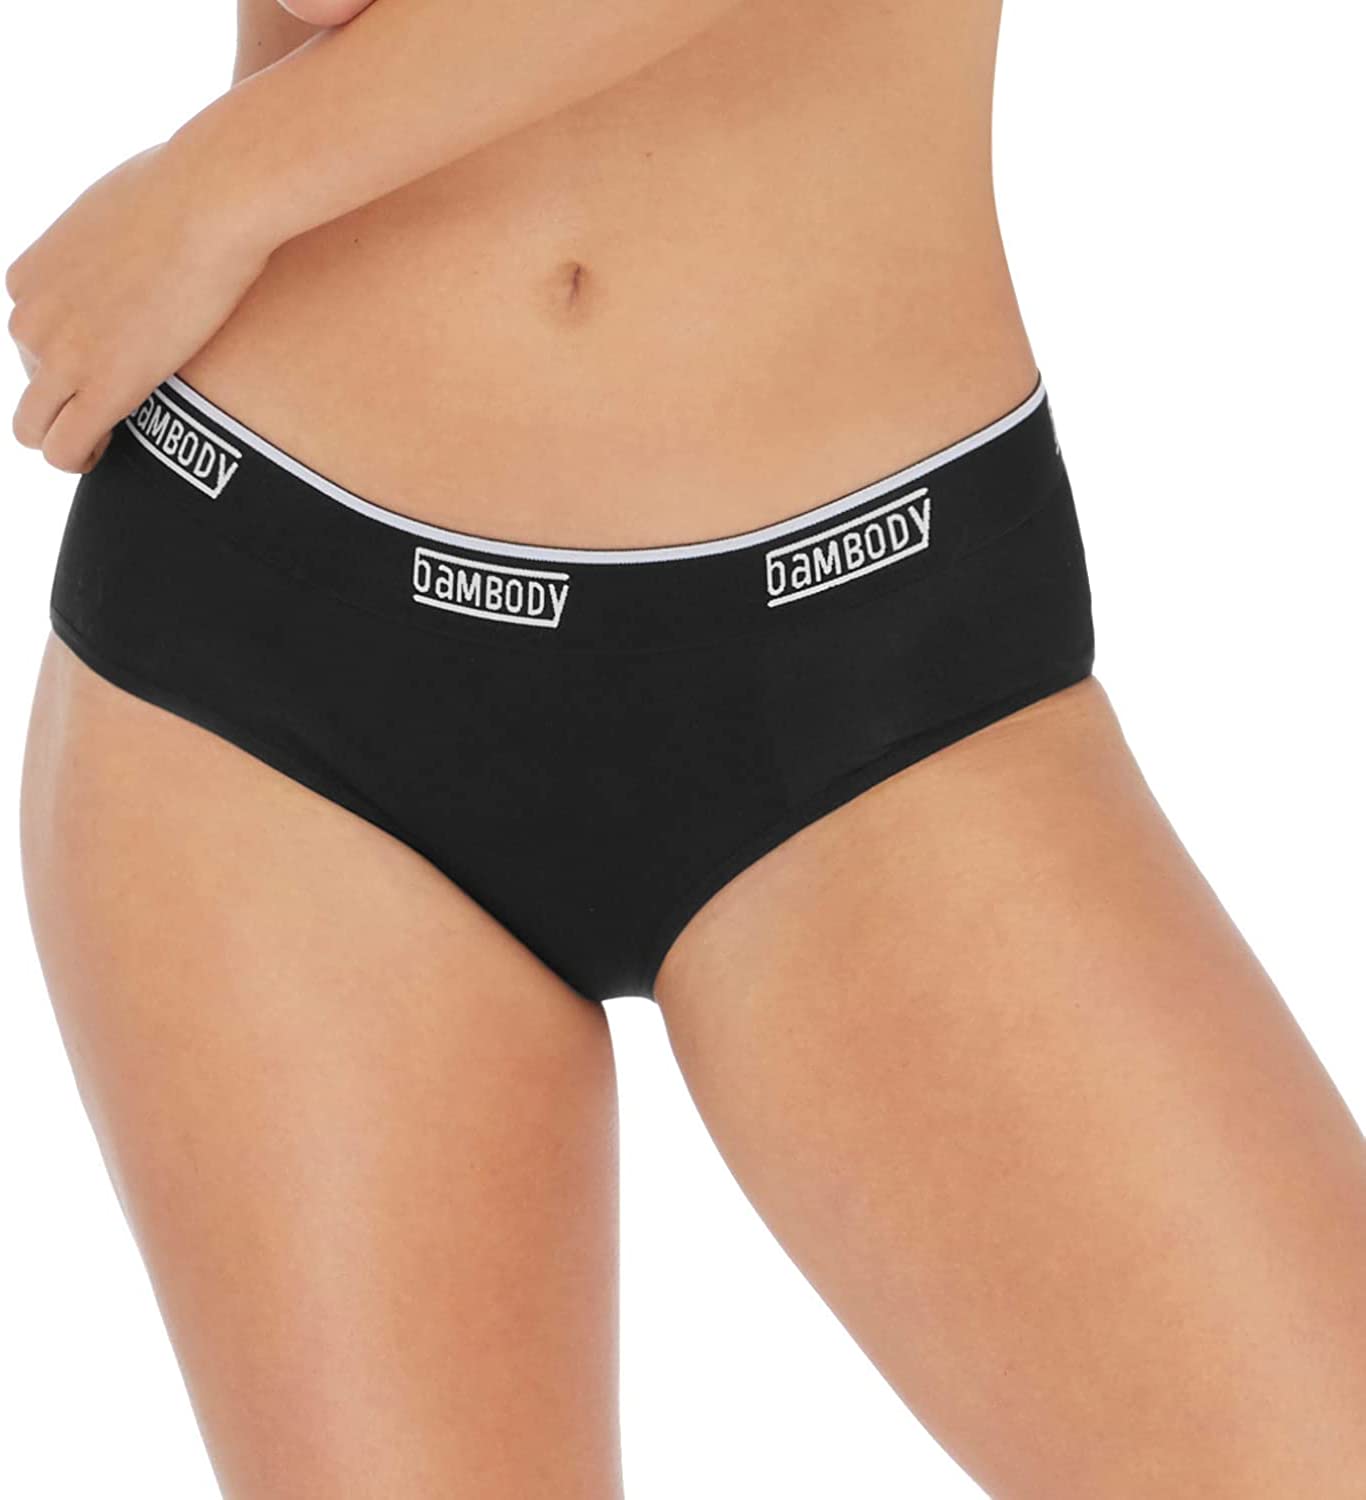 Bambody Leak Proof Hipster: Sporty Period Underwear for Women & Teens -  Menstrual Protection - Soft & Breathable - 2 Tampons